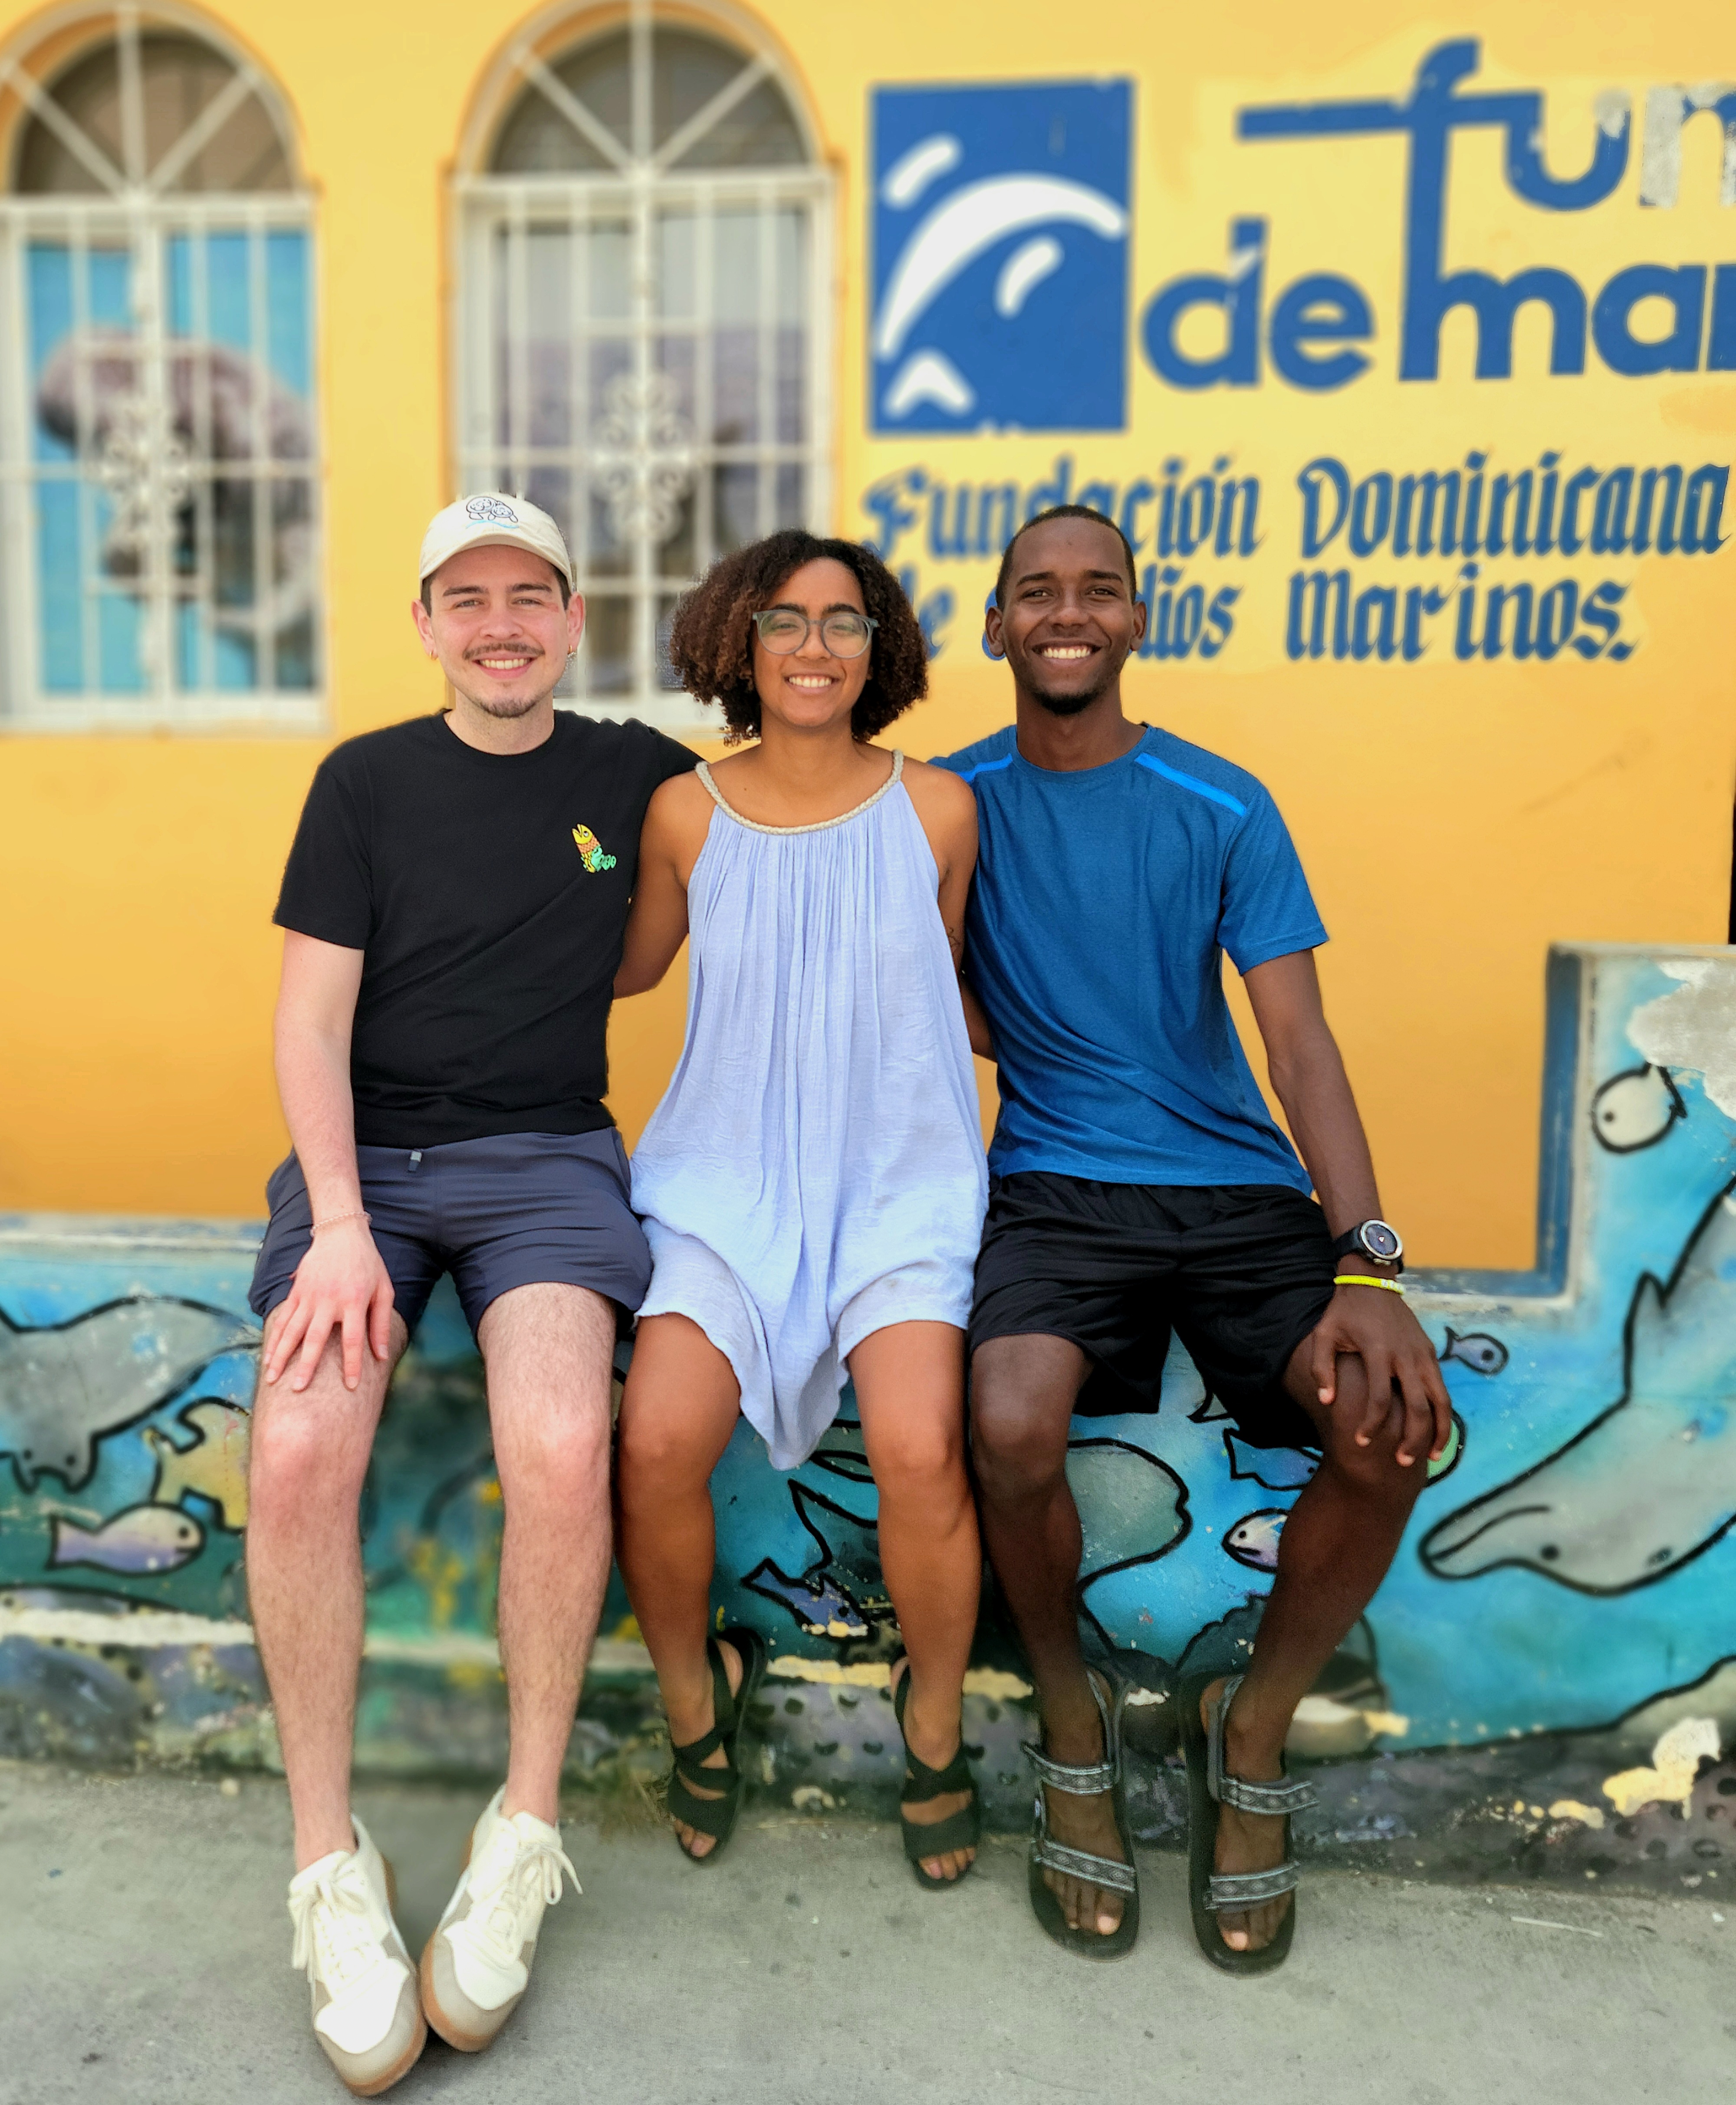 From left to right: Ríos-Guzmán; Andreína Valdez Trinidad, biologist; and Michael Del Rosario, biologist, in front of the FUNDEMAR headquarters